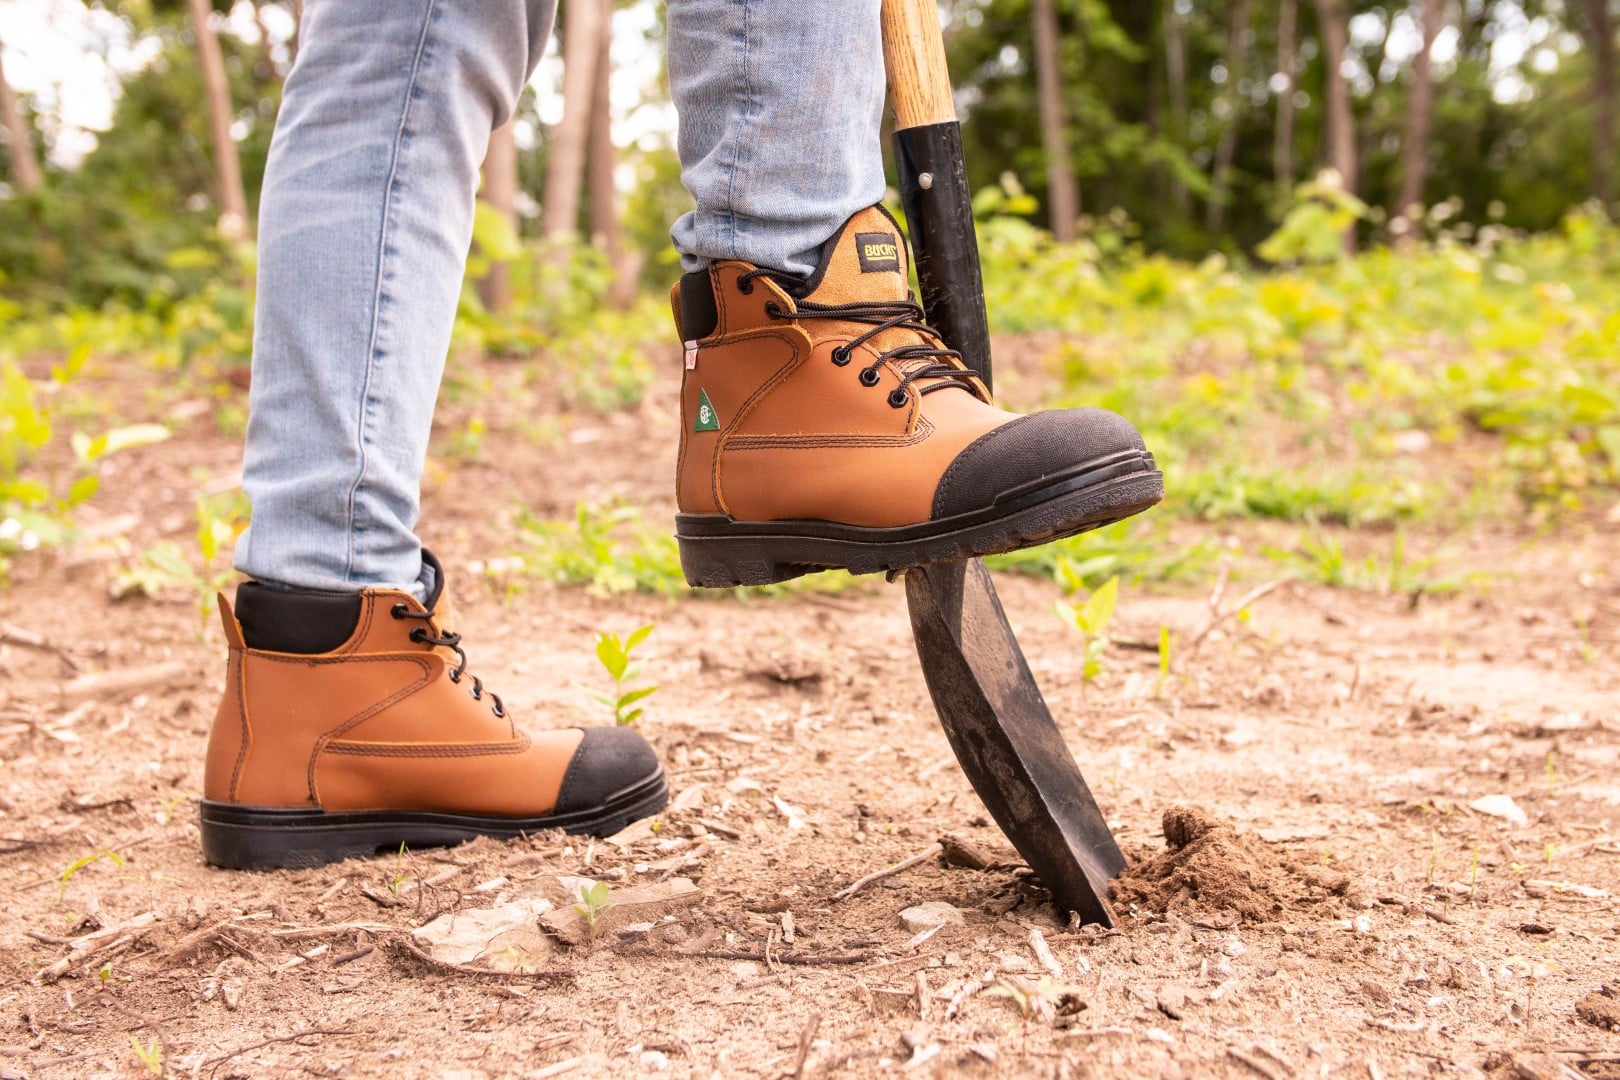 Benefits of a Well-Fitting Work Boot